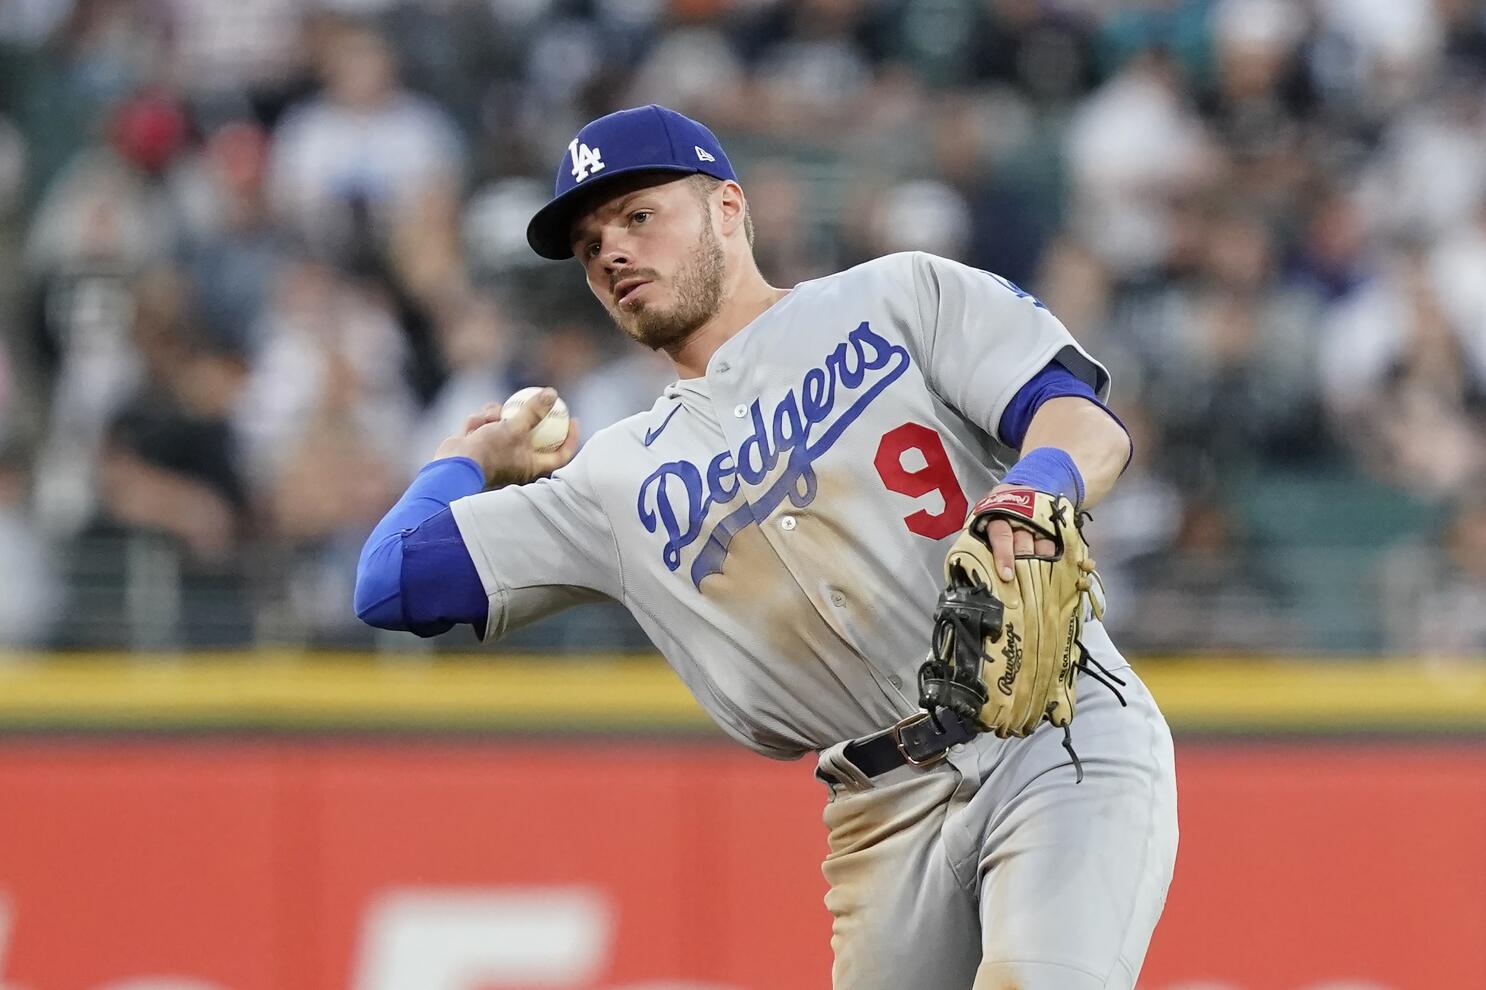 Los Angeles Dodgers at Cincinnati Reds odds and predictions